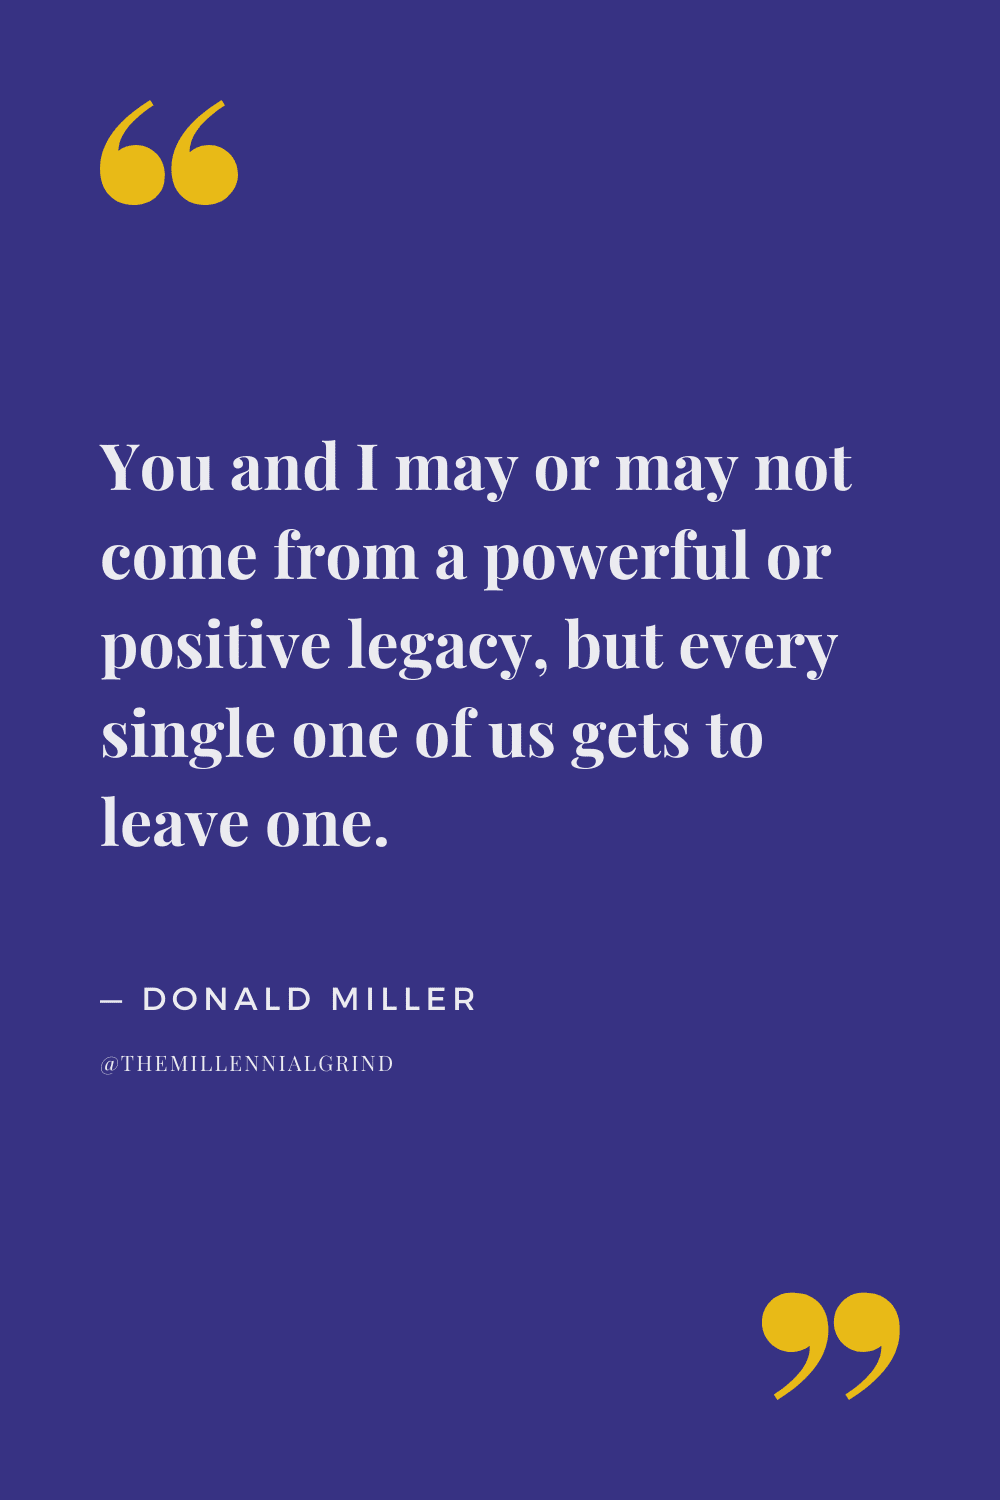 Quotes from Hero on a Mission by Donald Miller